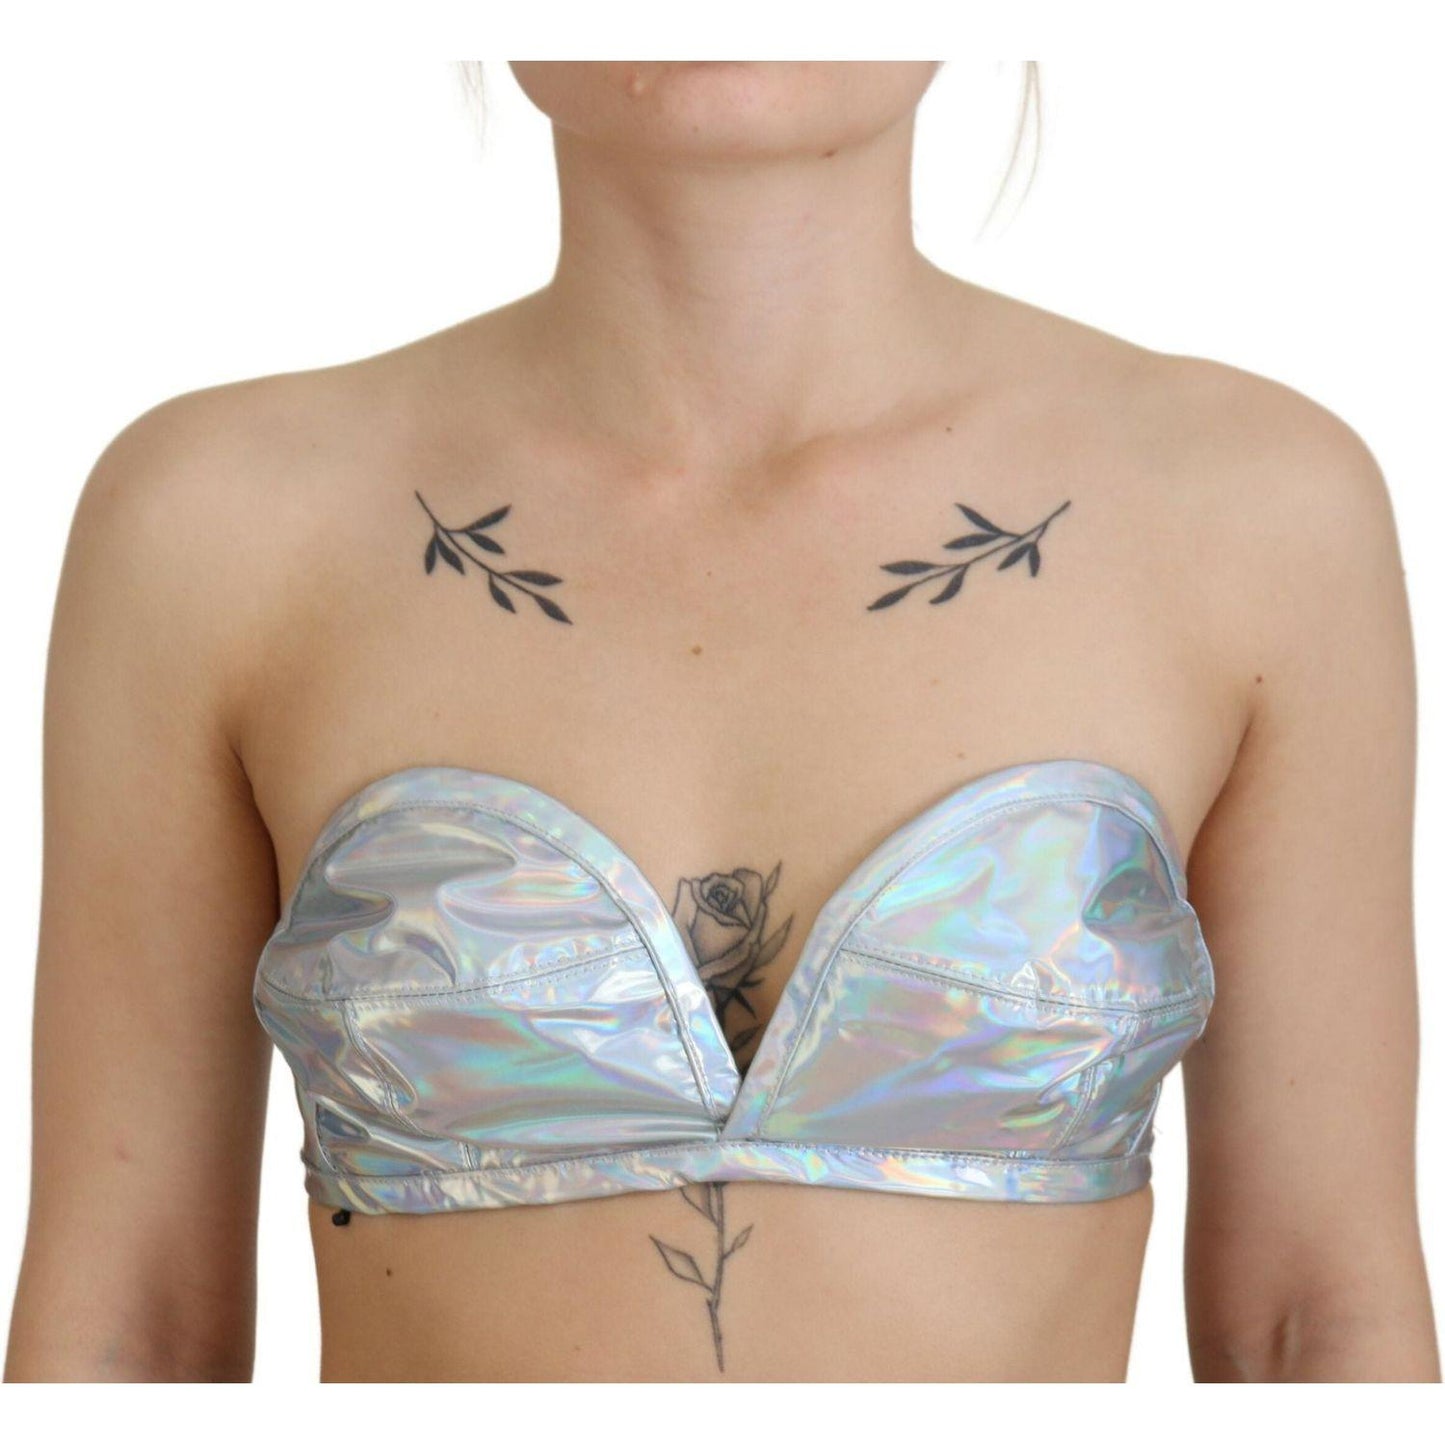 Dolce & Gabbana Silver Shimmer Bustier Top silver-holographic-effect-bustier-brassiere-top